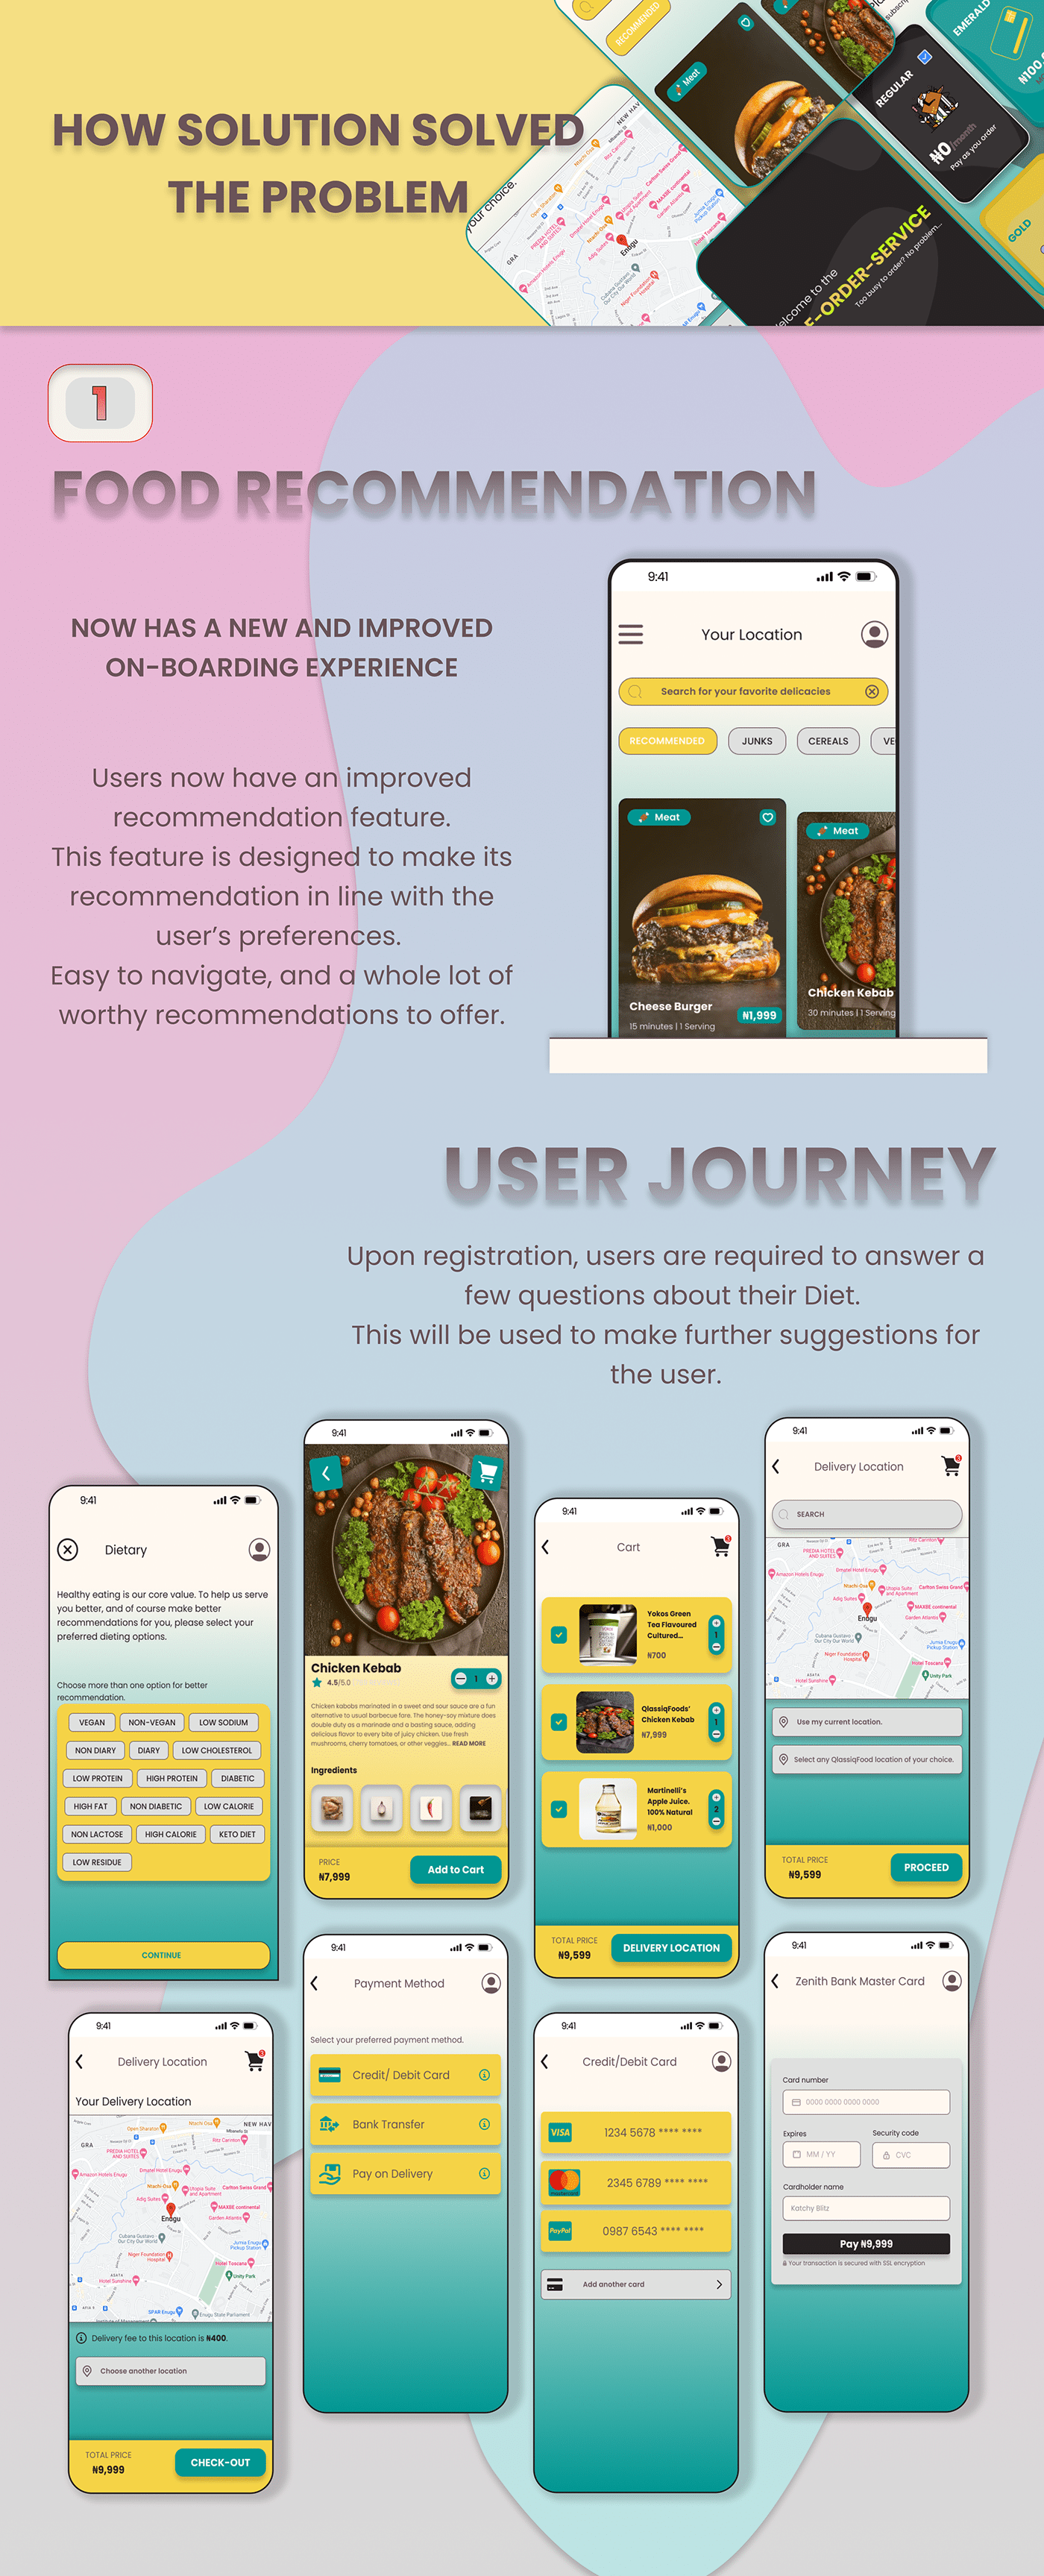 A food ordering app Delivers Meals Figma Food  Mobile app suggestions ui design UI/UX user interface ux